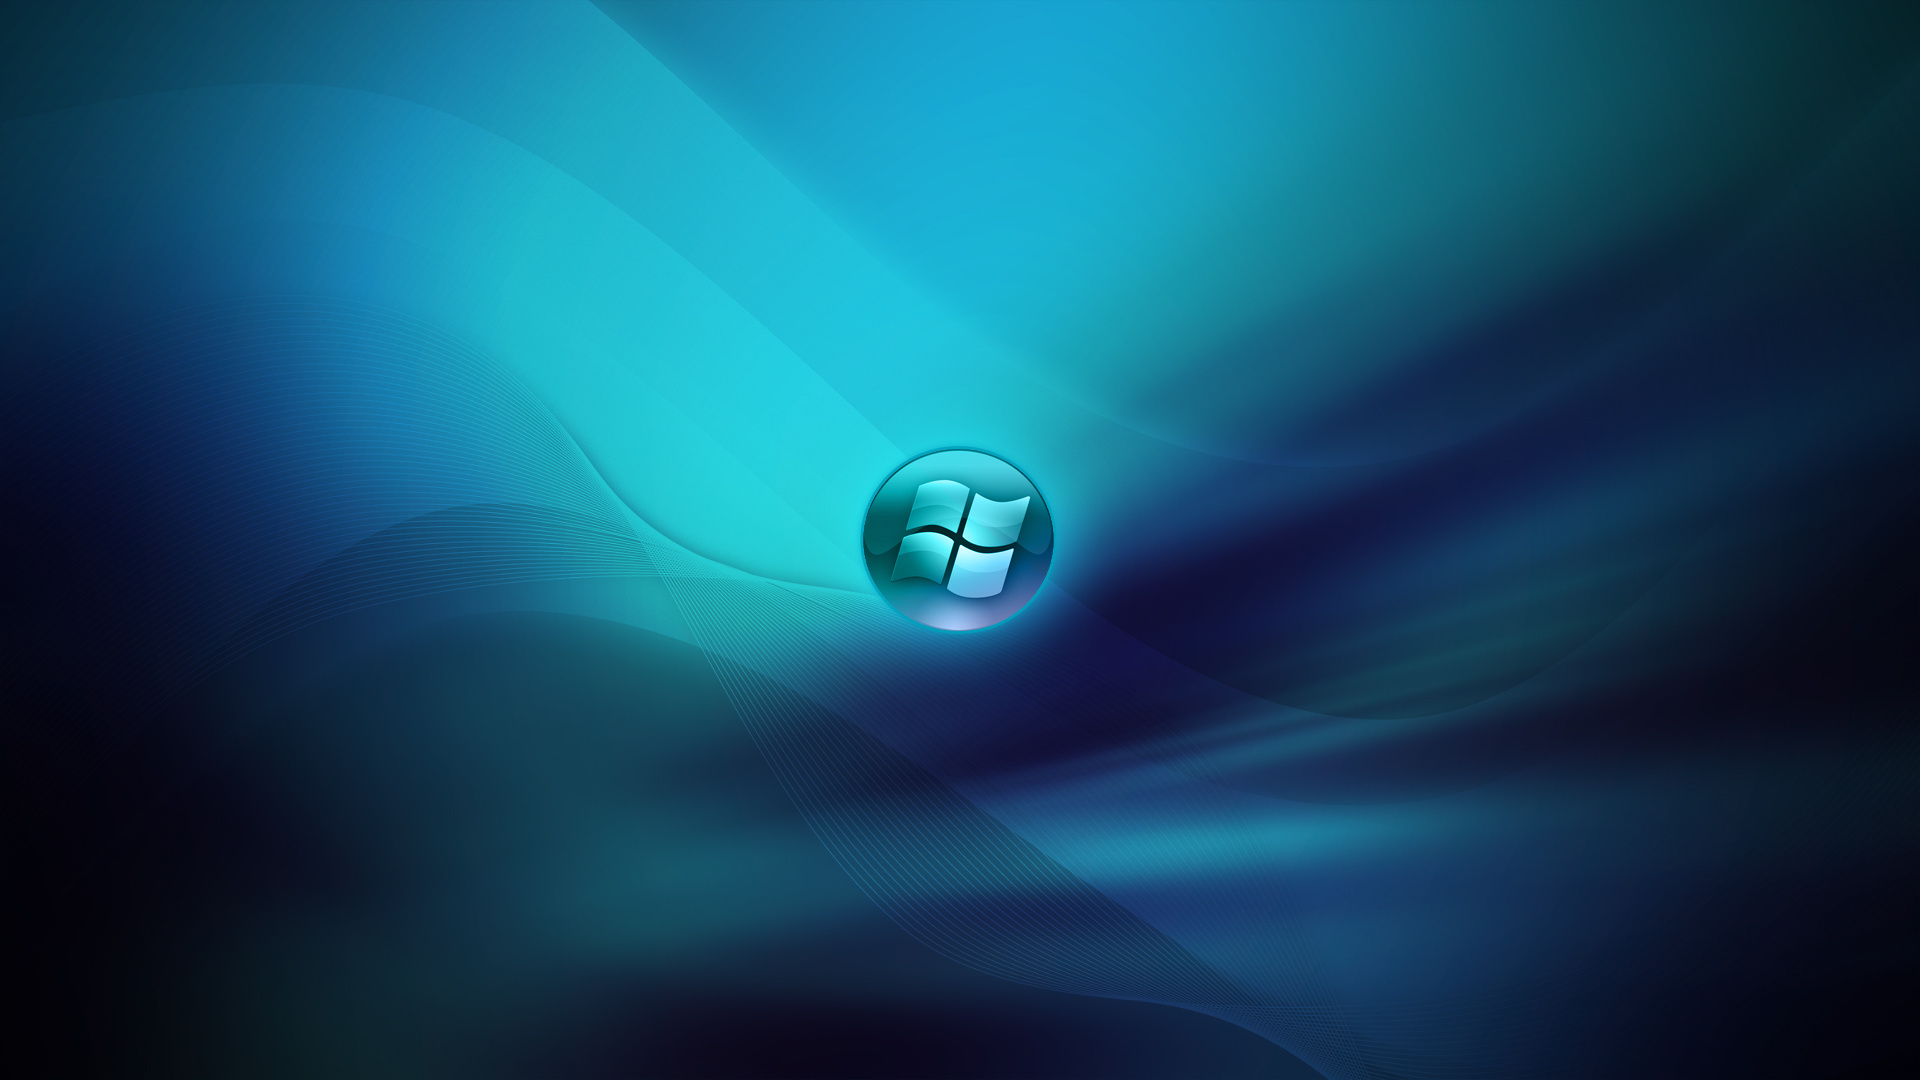 Blue Theme HD Wallpaperputers Windows Car Pictures